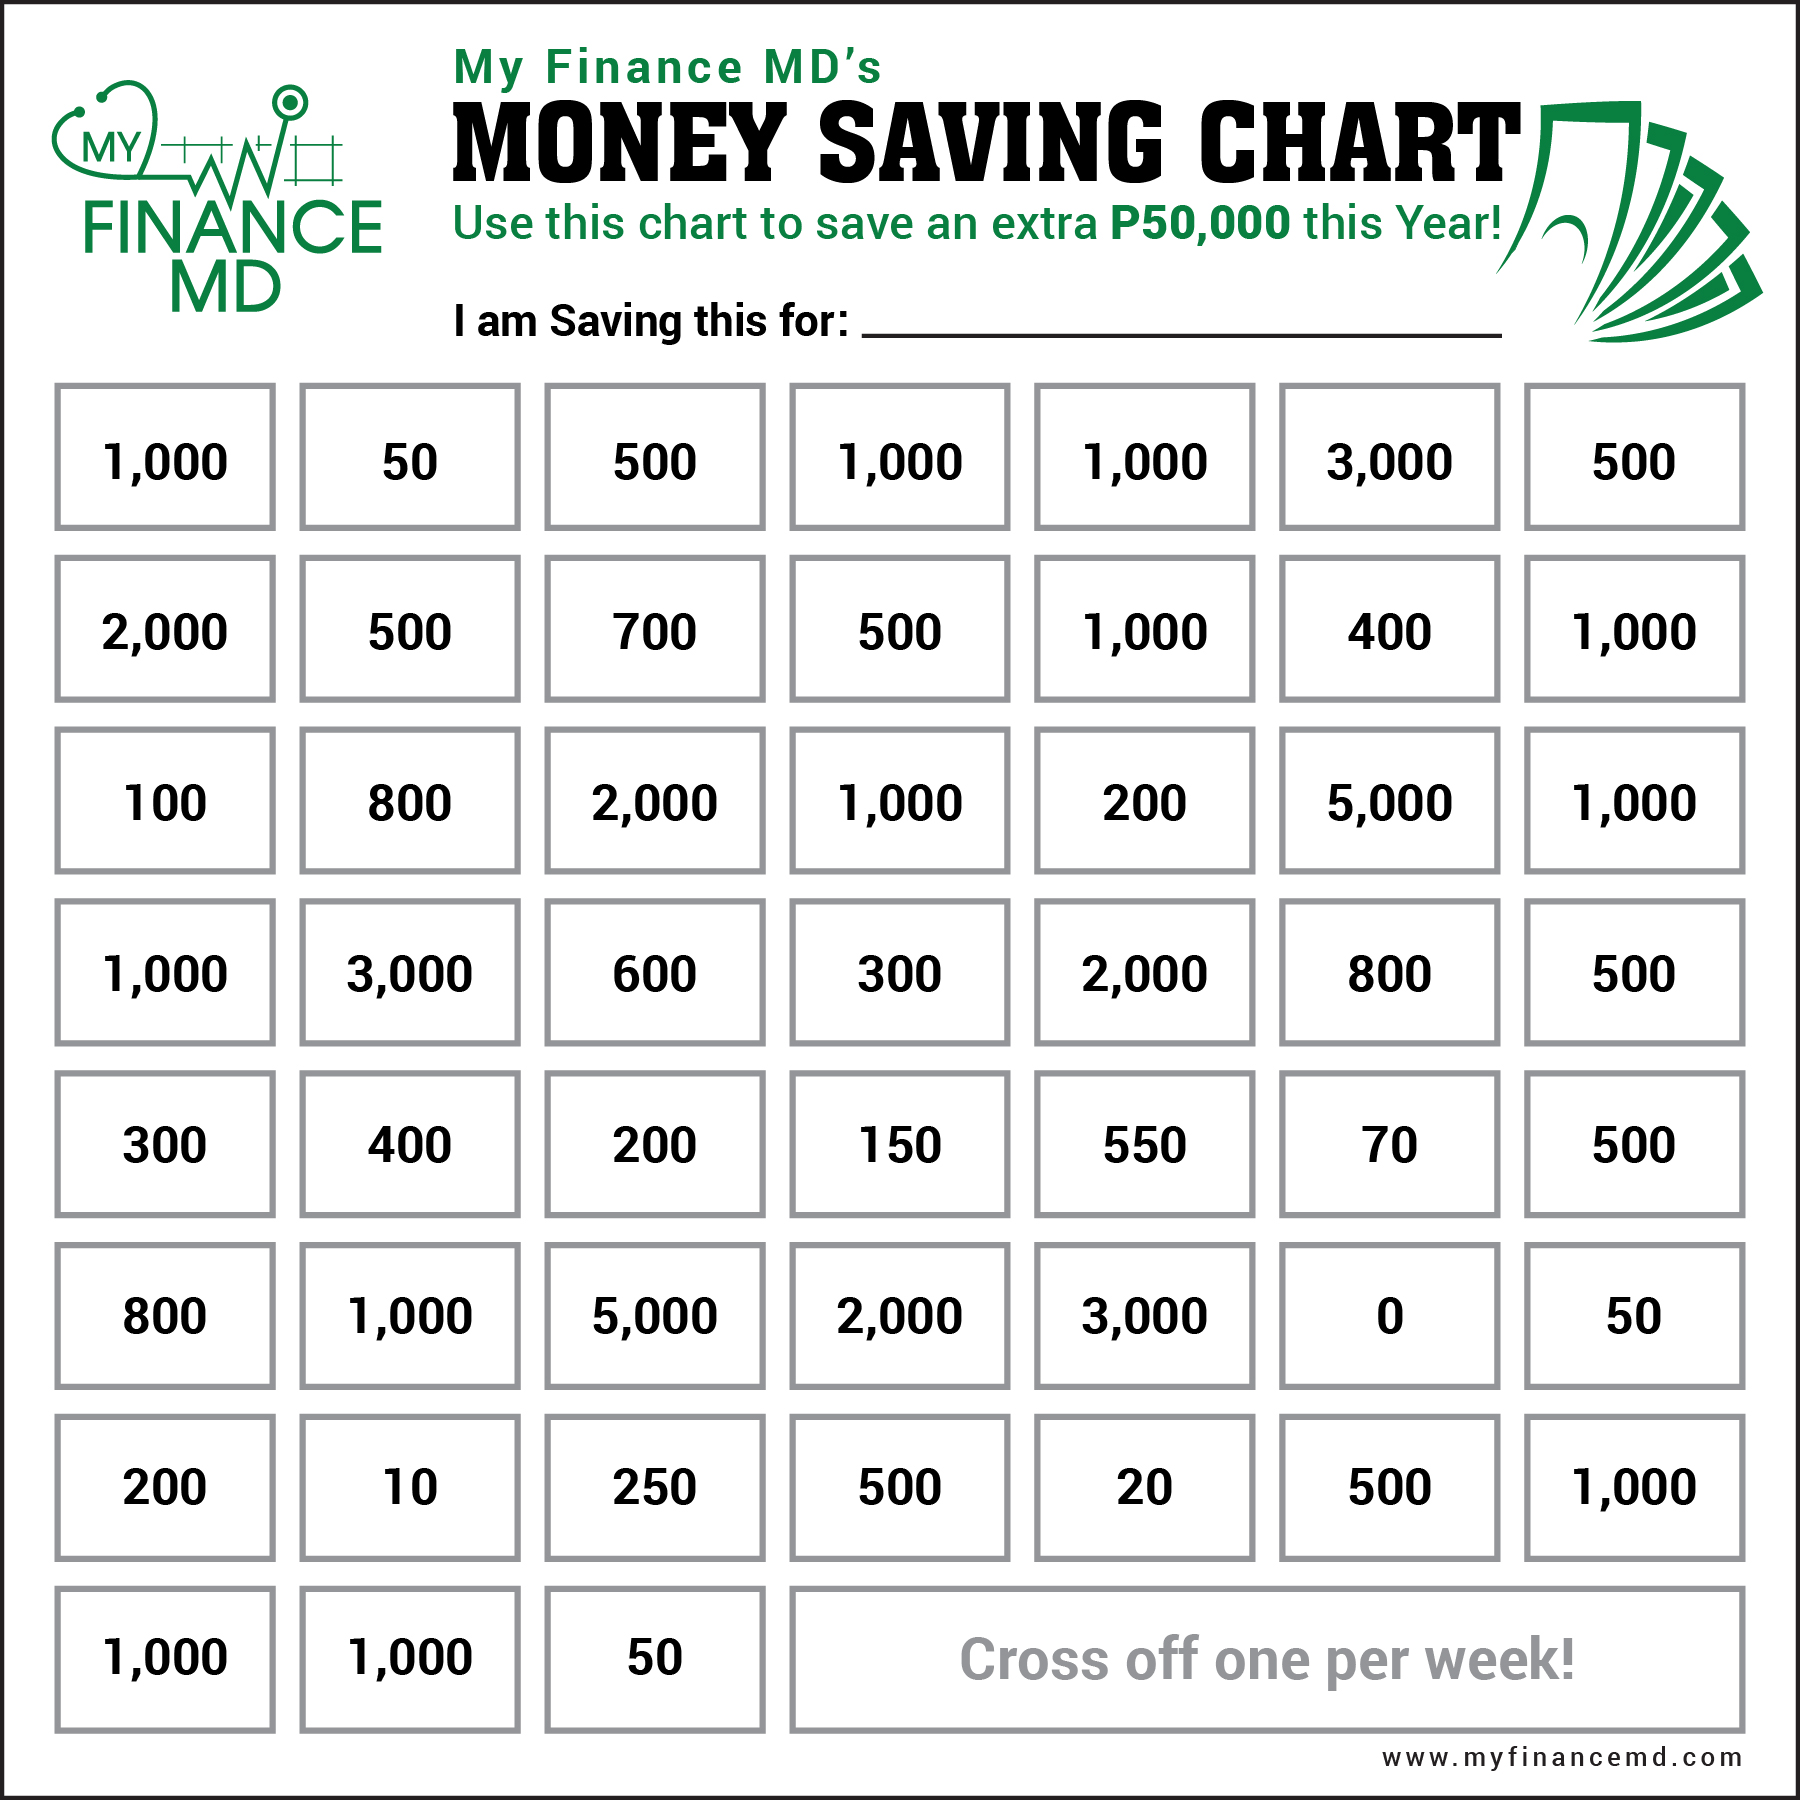 52Week Money Saving Challenge for those with Inconsistent